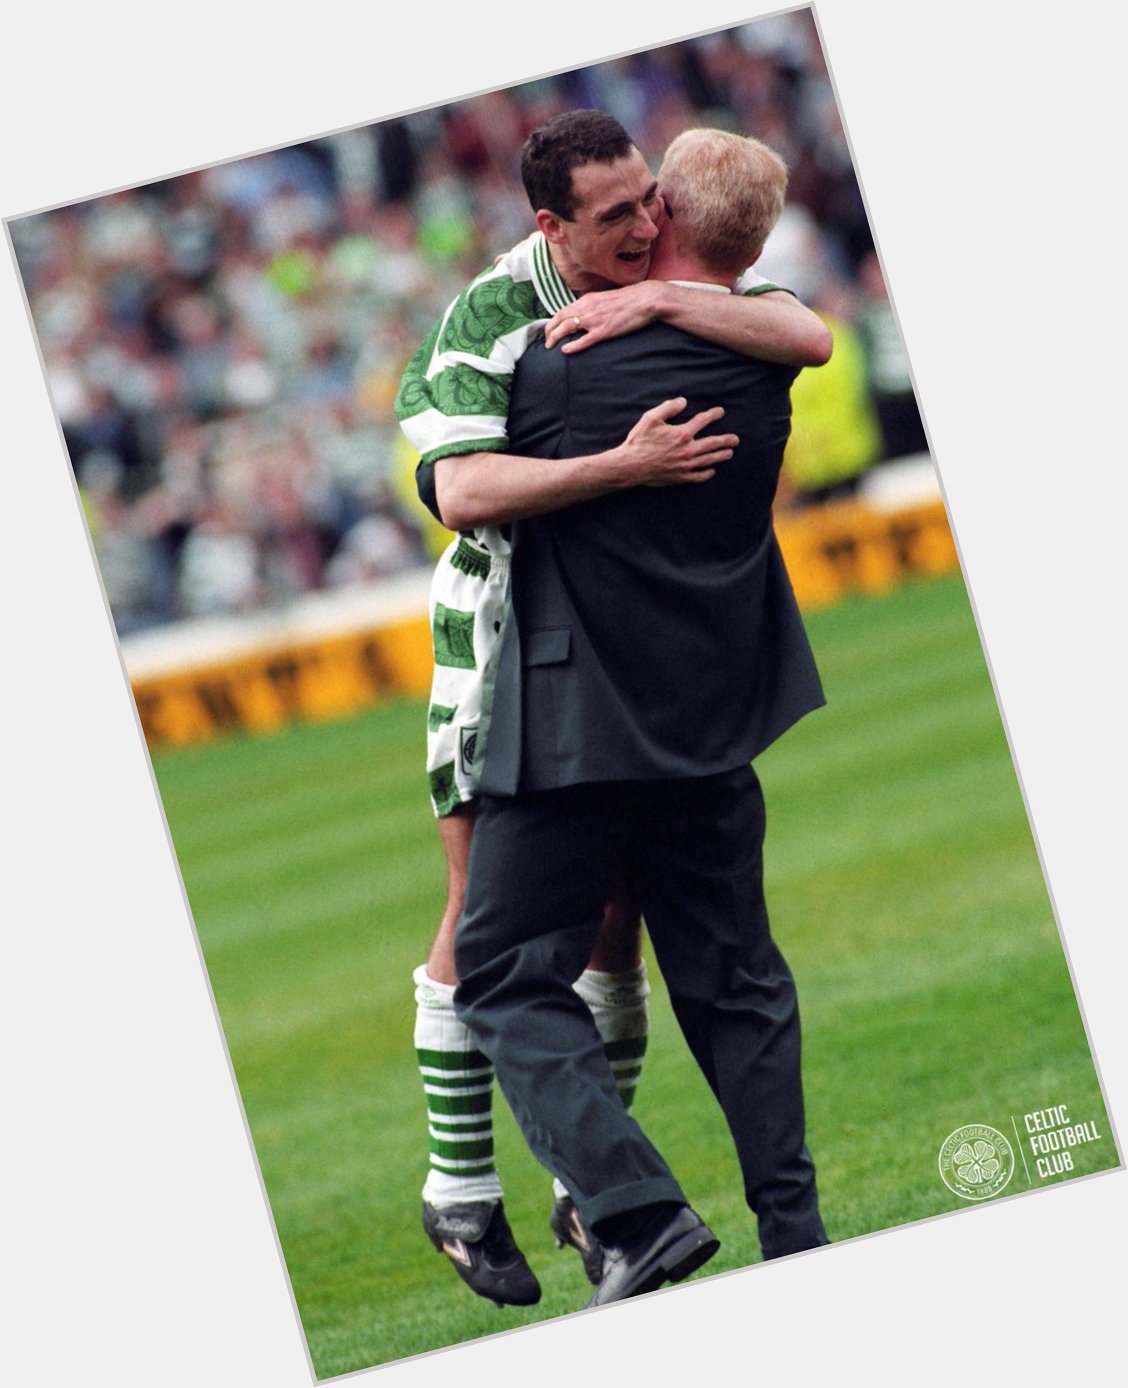 And they gave us James Mcgrory  and paul Mcstay... happy birthday to the maestro 